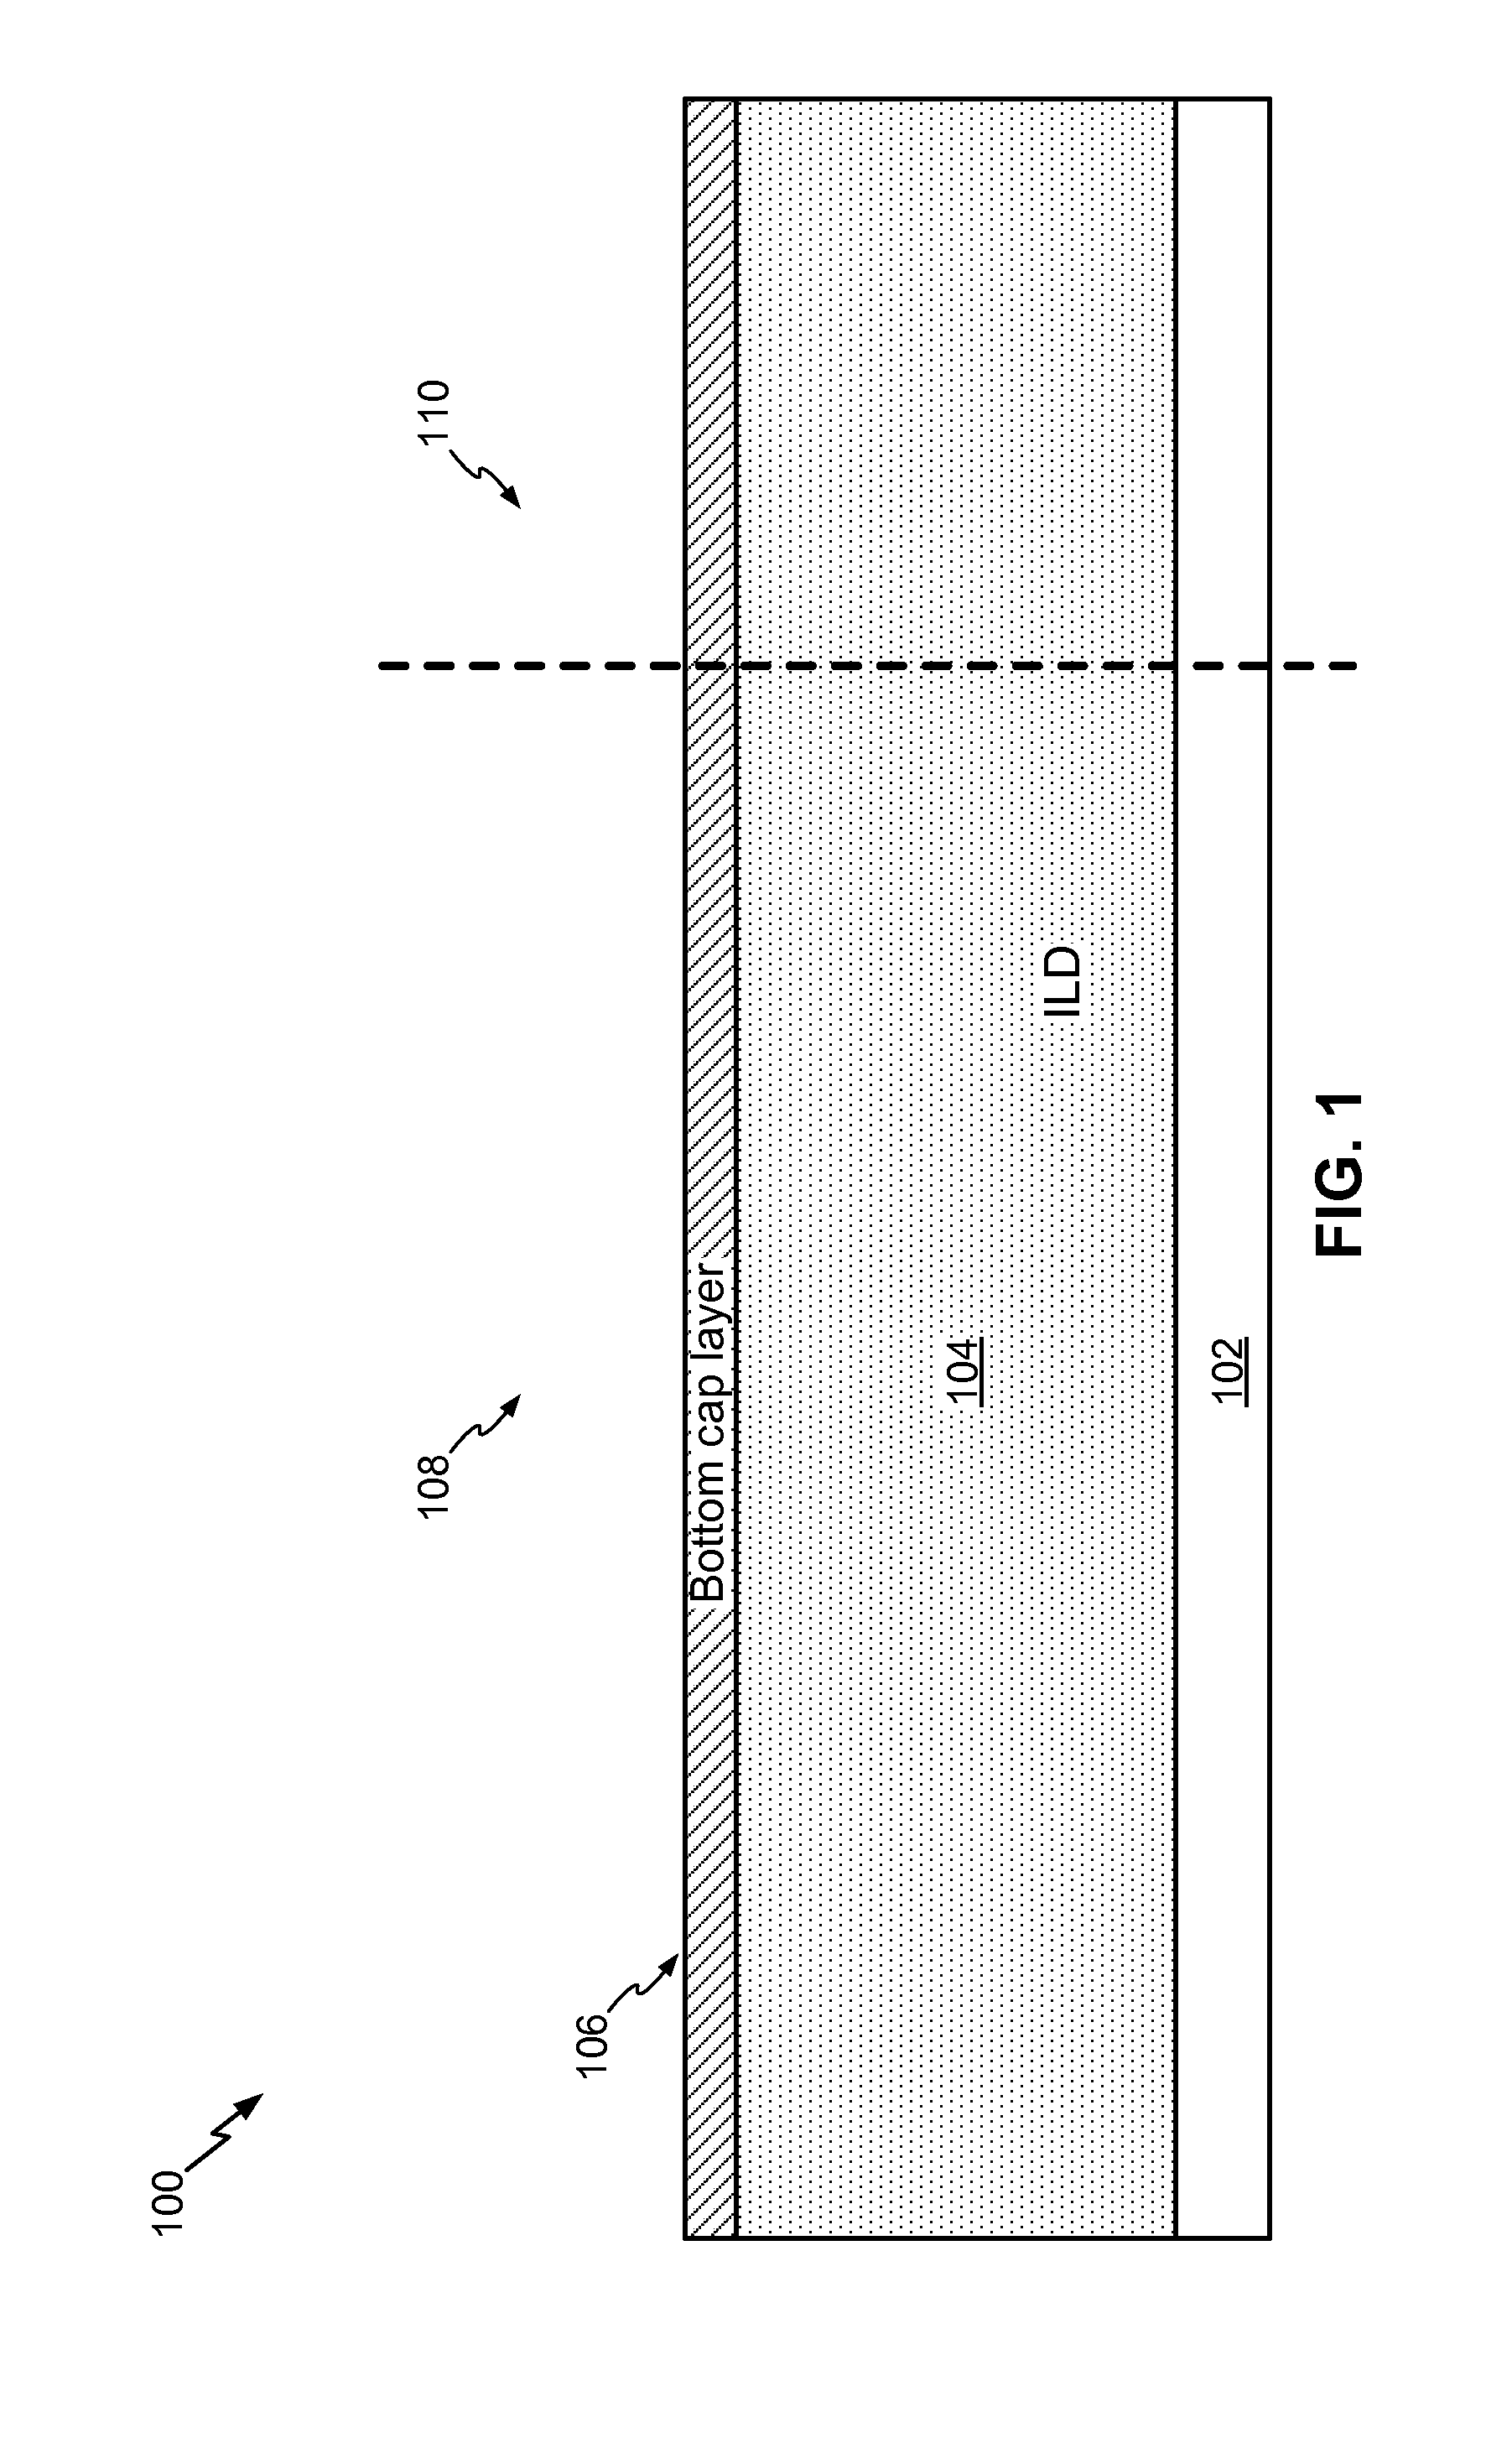 Magnetic Tunnel Junction Device and Fabrication